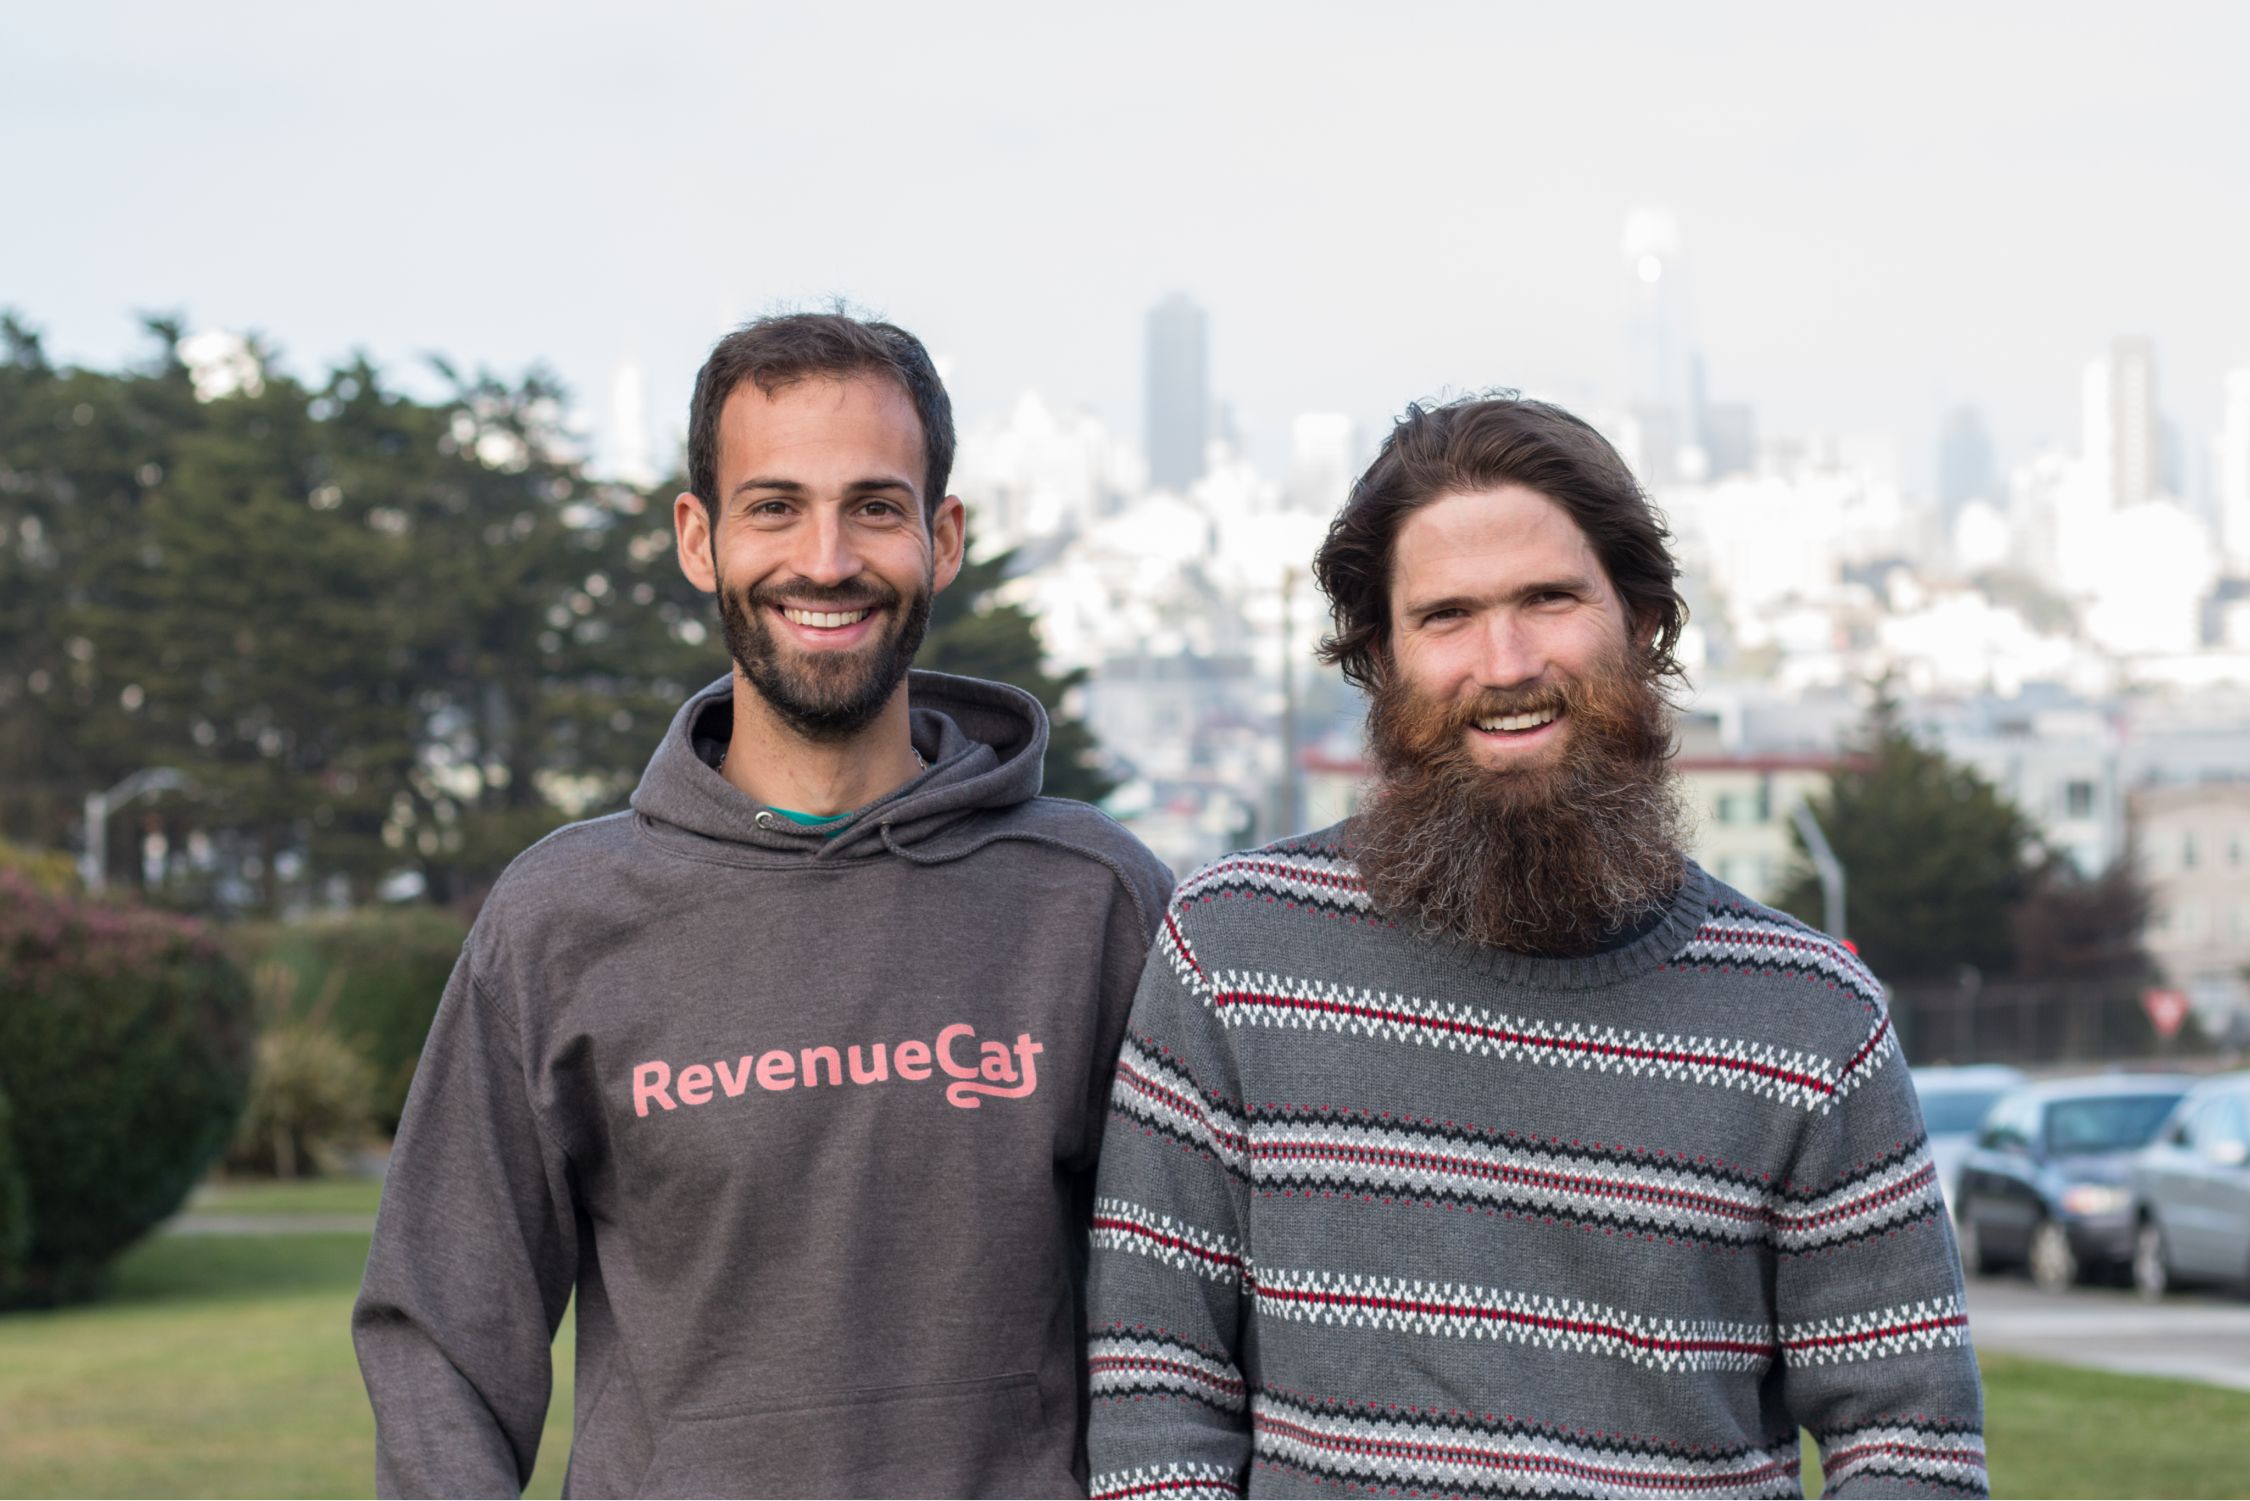 The Co-founders of RevenueCat: Miguel Carranza (left) and Jacob Eiting (right)